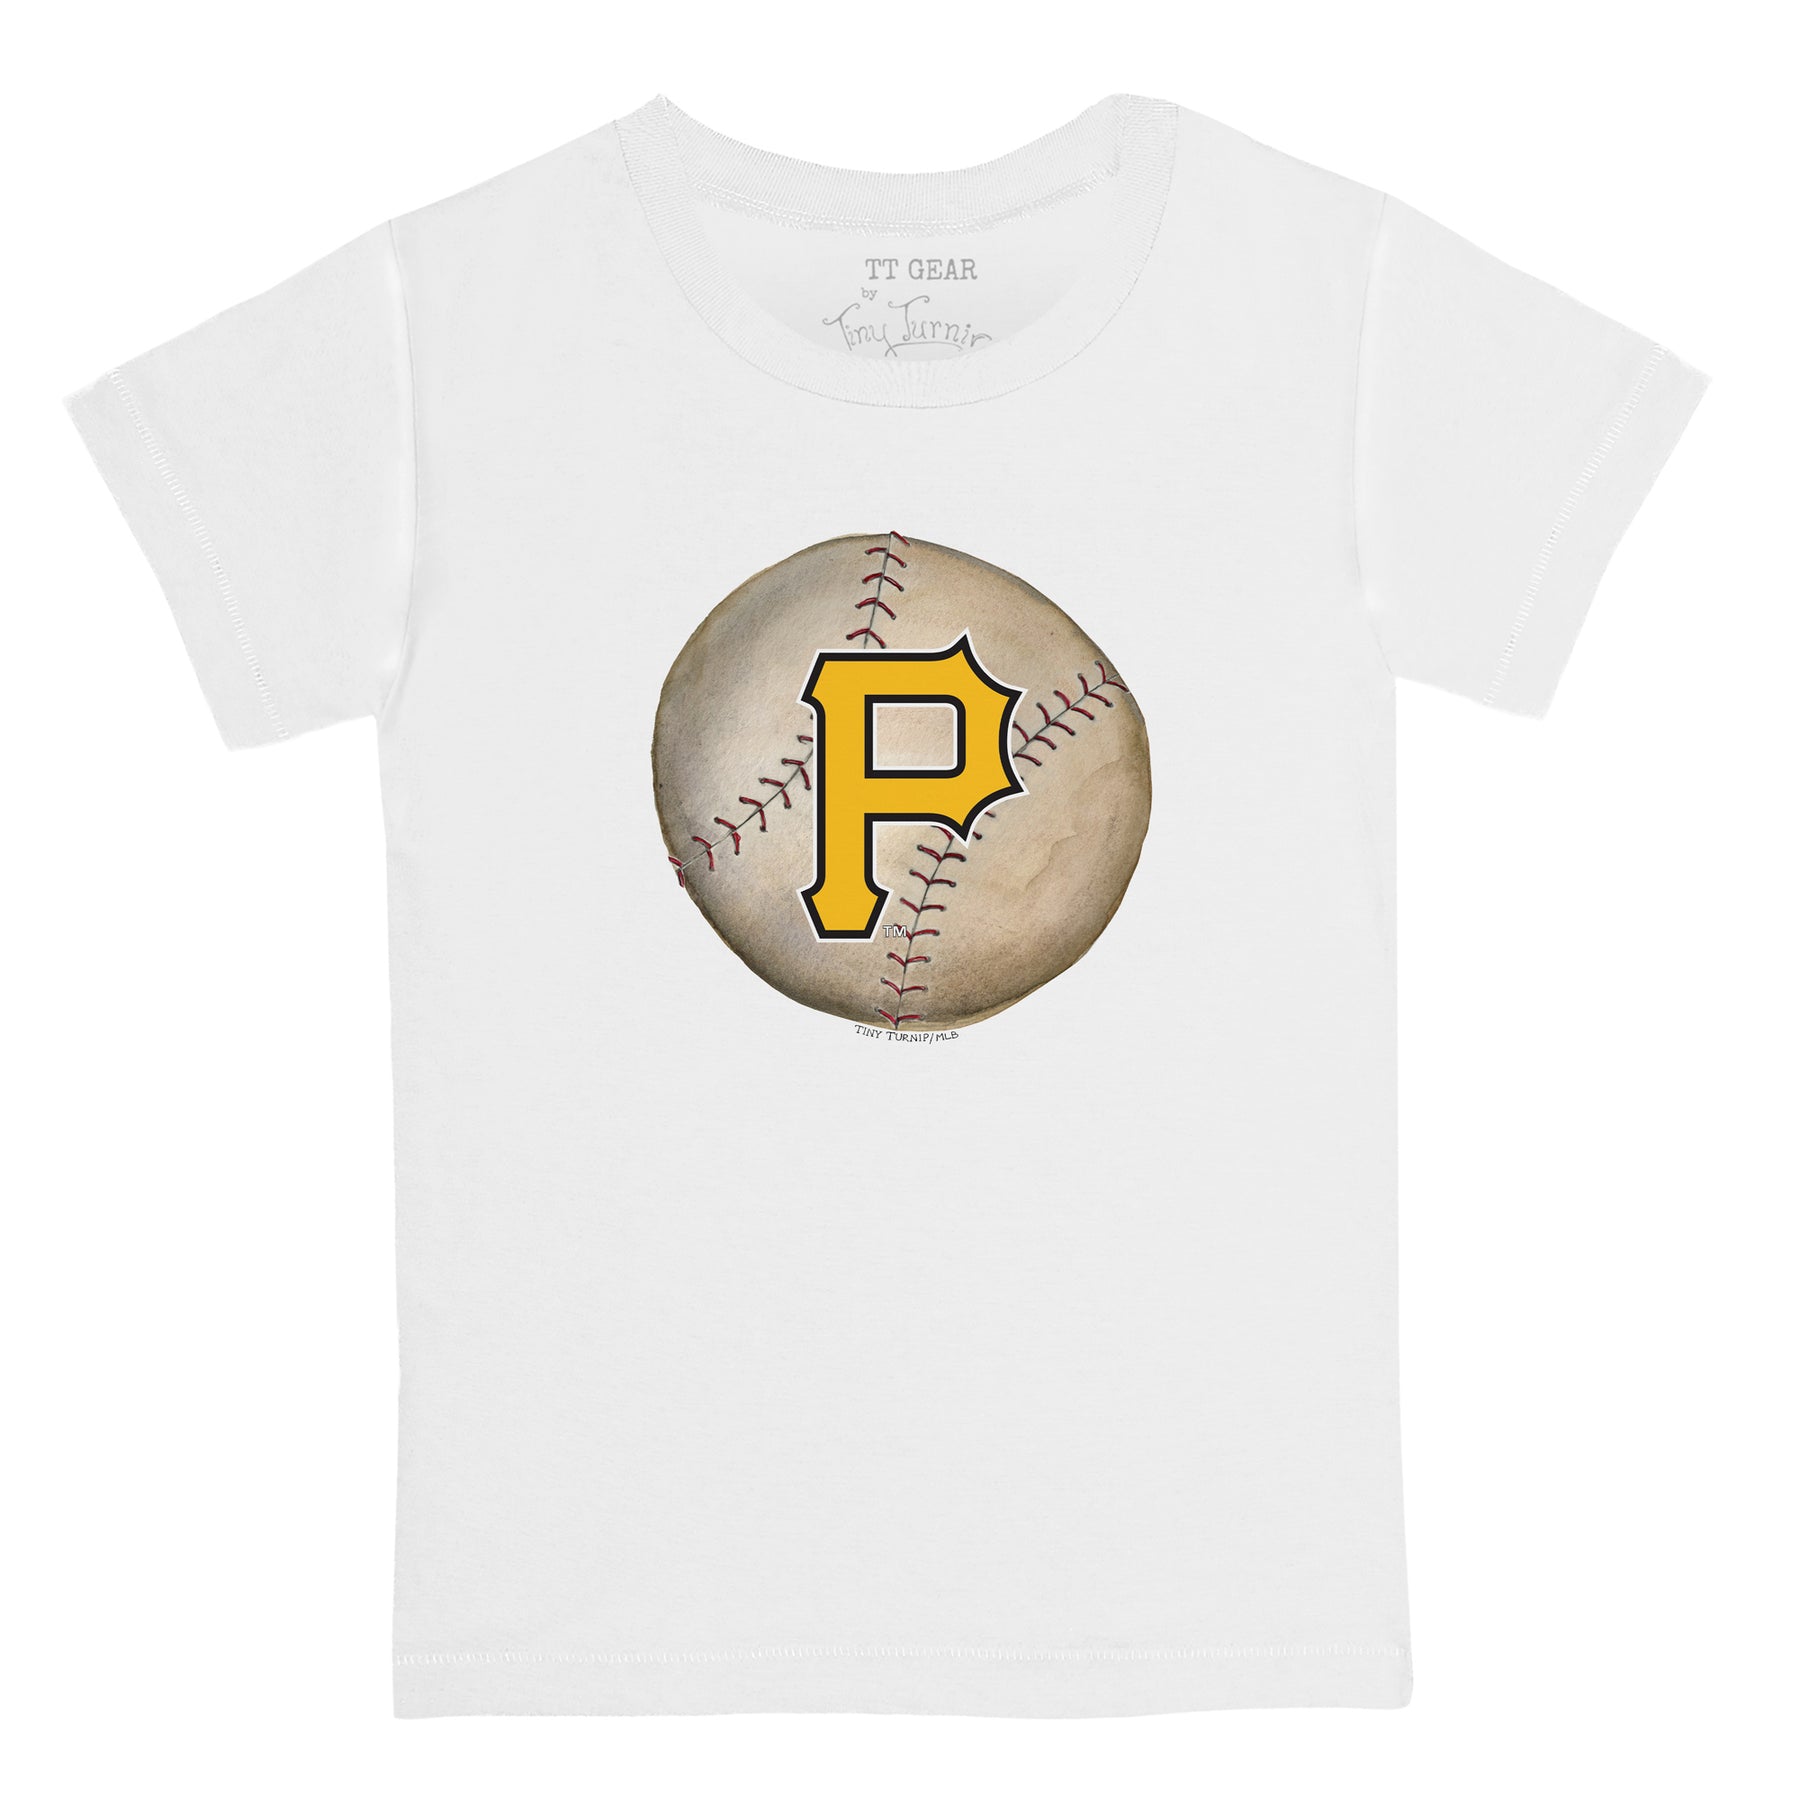 Pittsburgh Pirates White MLB Jerseys for sale